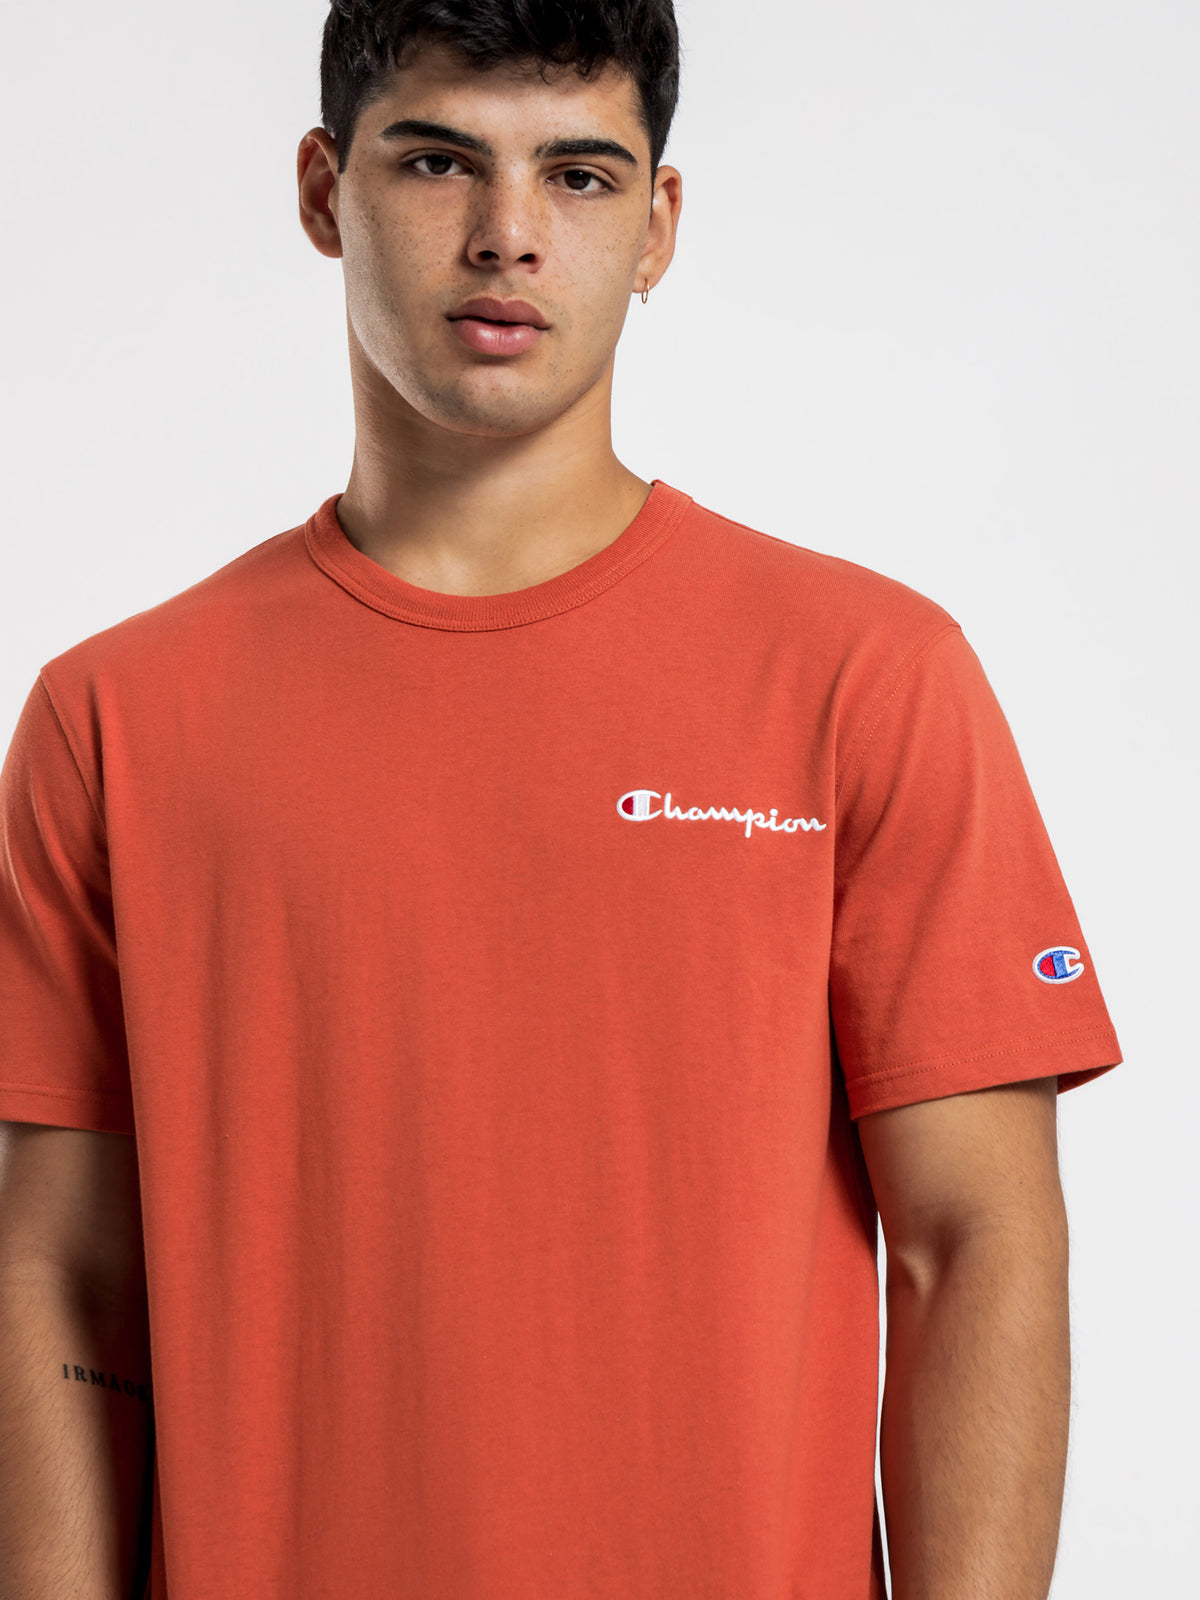 Heritage T-Shirt in Ambitious Orange